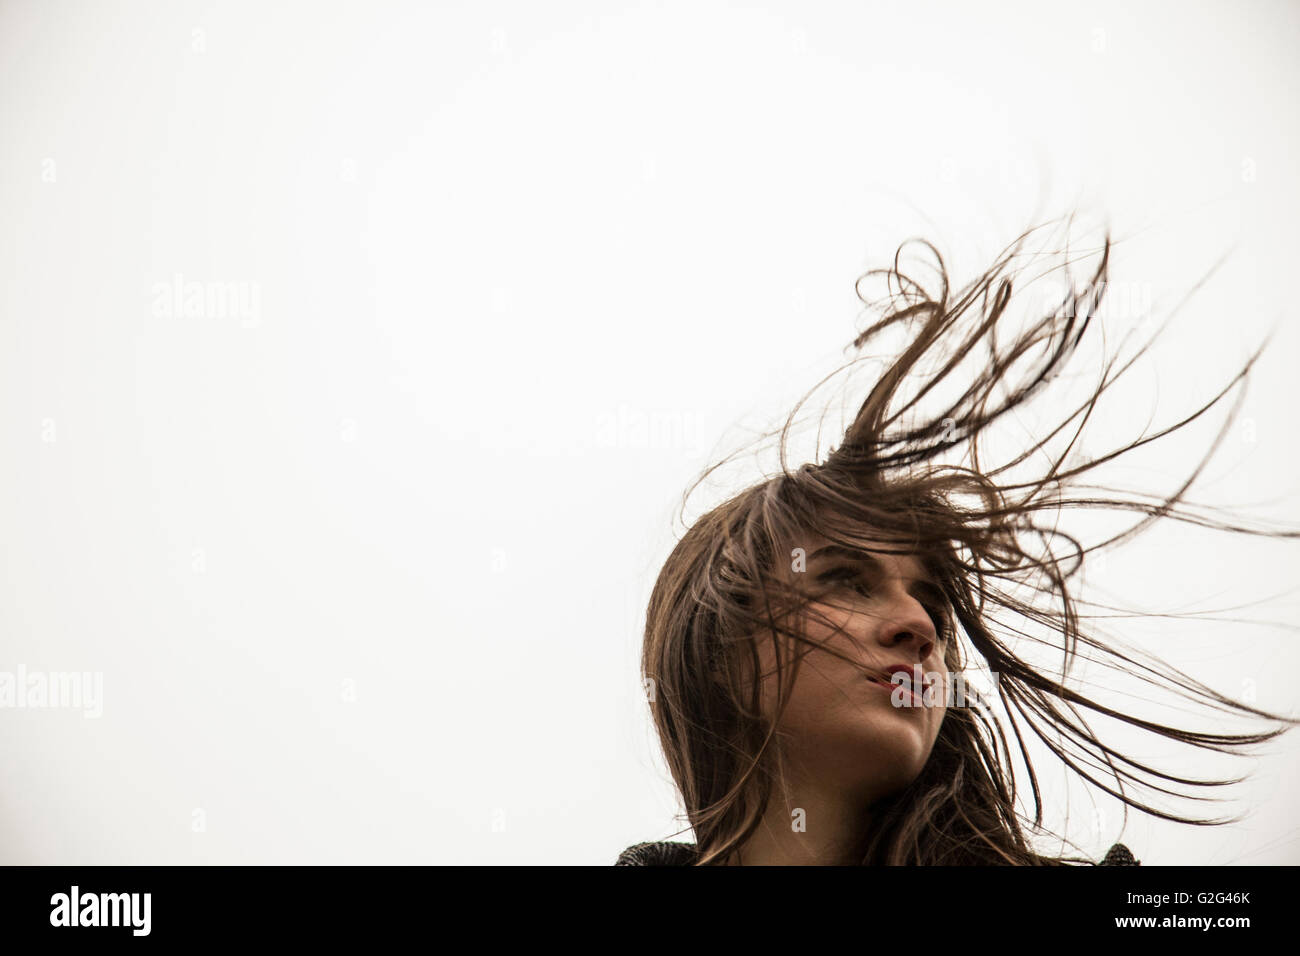 Portrait of Young Adult Woman with Hair Blowing in Wind, Low Angle View  Stock Photo - Alamy